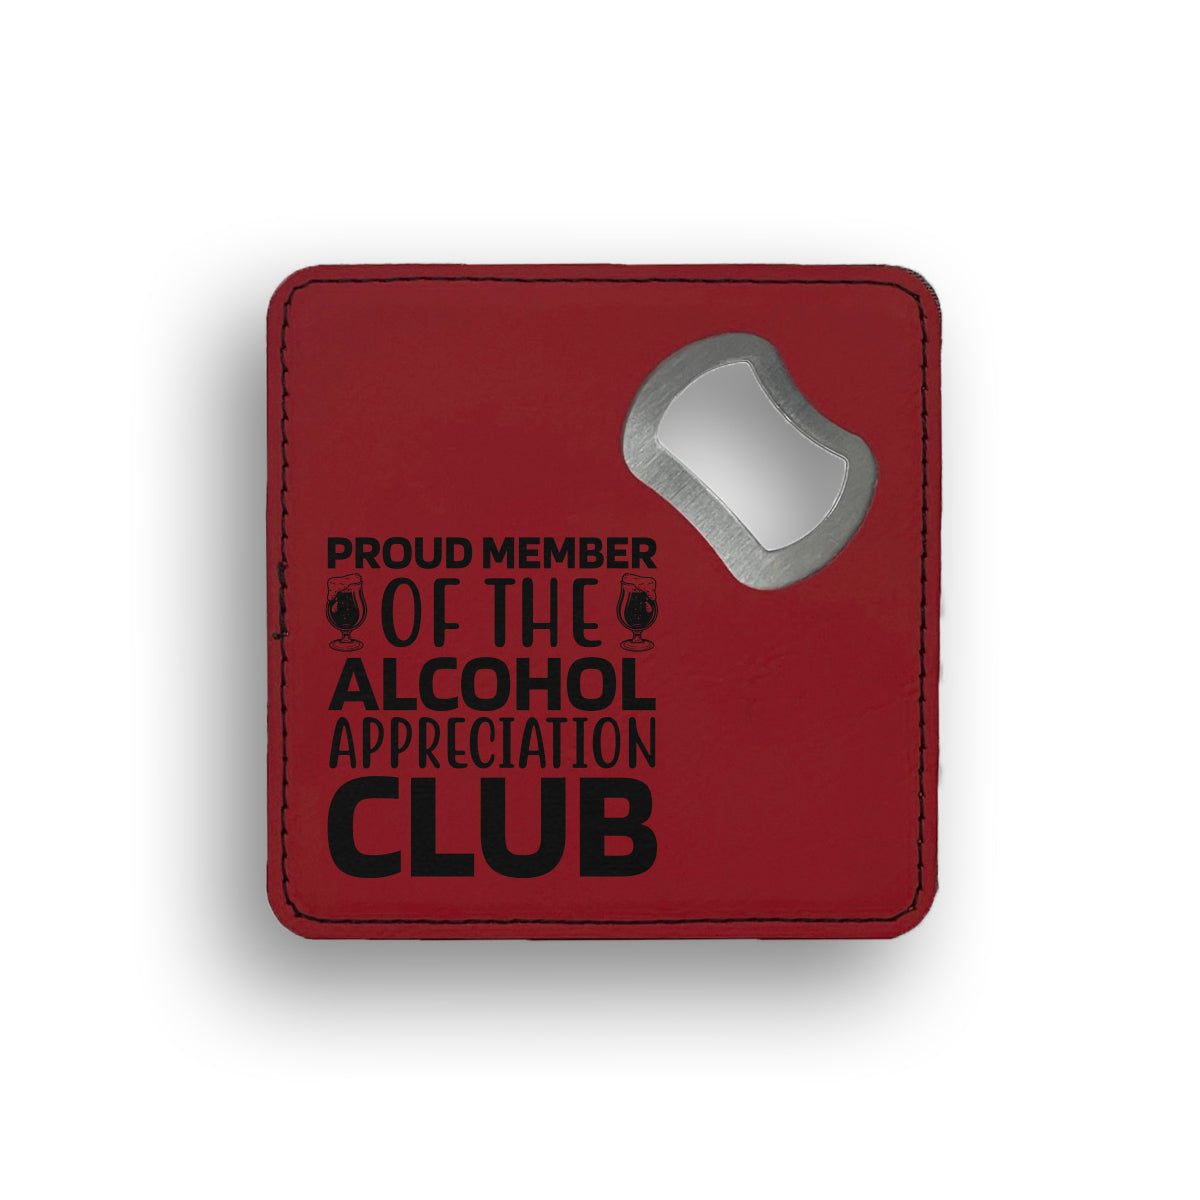 Proud Member Of The Alcohol Appreciation Bottle Opener Coaster